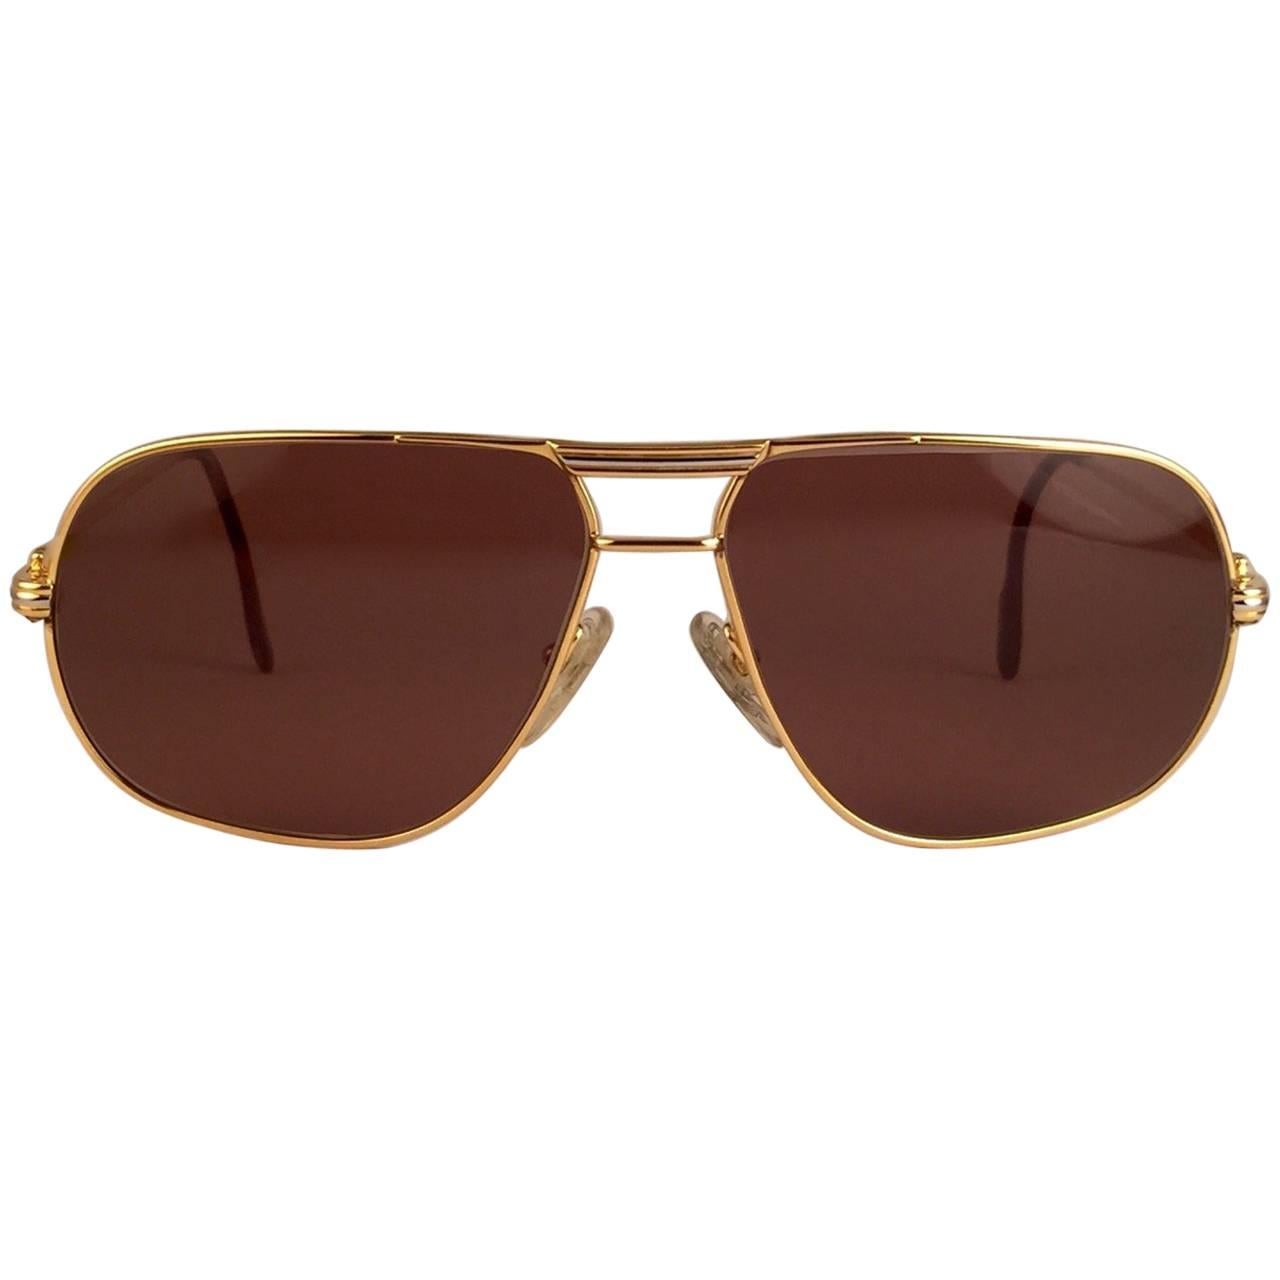 New 1988 Cartier Aviator Tank sunglasses with new honey brown (uv protection)
Frame is with the front and sides in yellow and white gold. 
All hallmarks. rRd enamel with cartier gold signs on the earpaddles. so classy, both arms sport the C from